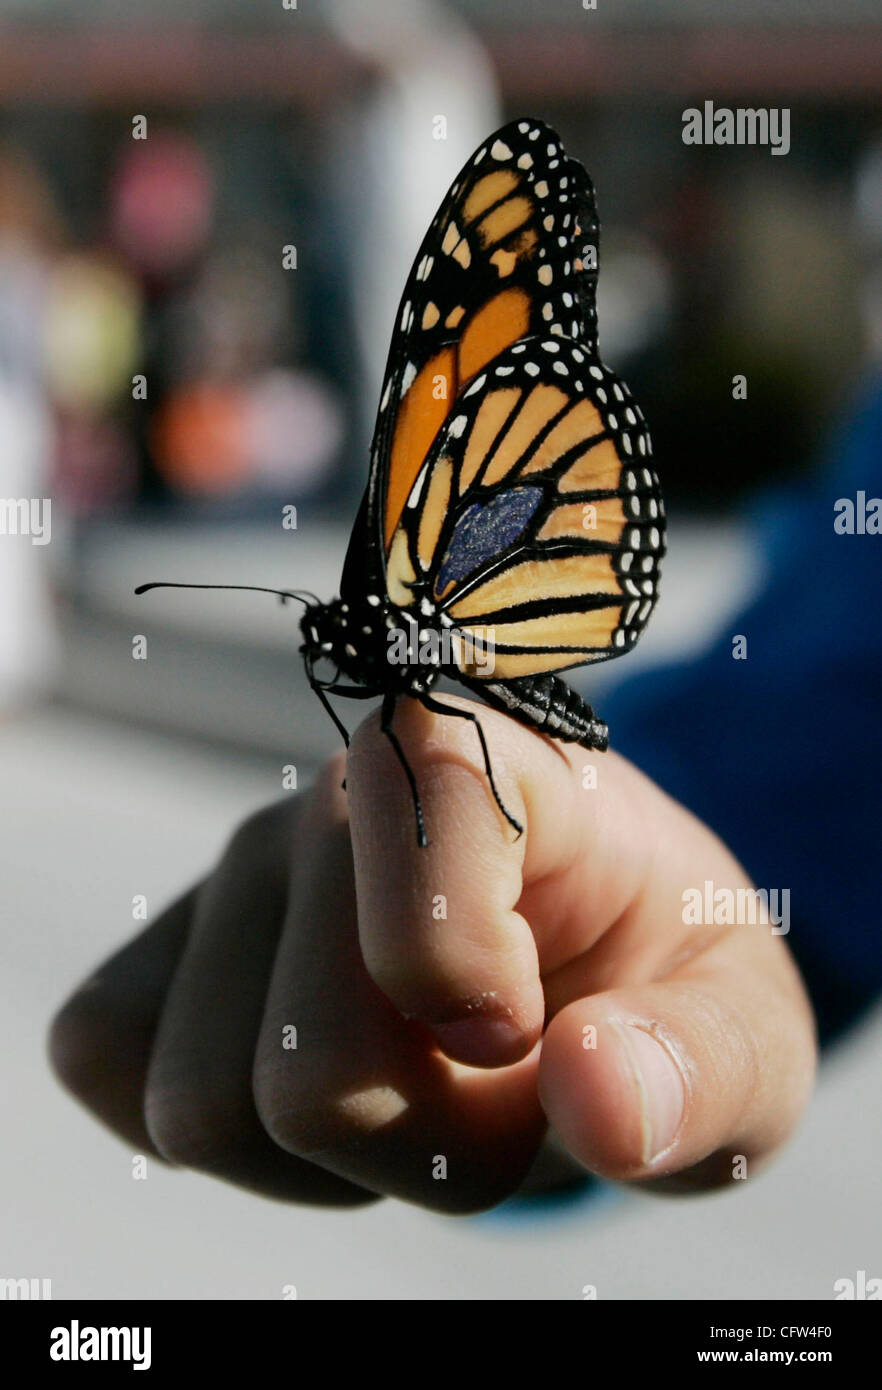 February 5th, 2006, 4SRanch, California, USA. A tagged Monarch butterfly prepares to fly away after an dedication ceremony at Monterey Ridge Elementary School on Monday. The Monarchs which are the school's mascot, were released at the end of the ceremony dedicating the new school.  Mandatory Credit: Stock Photo